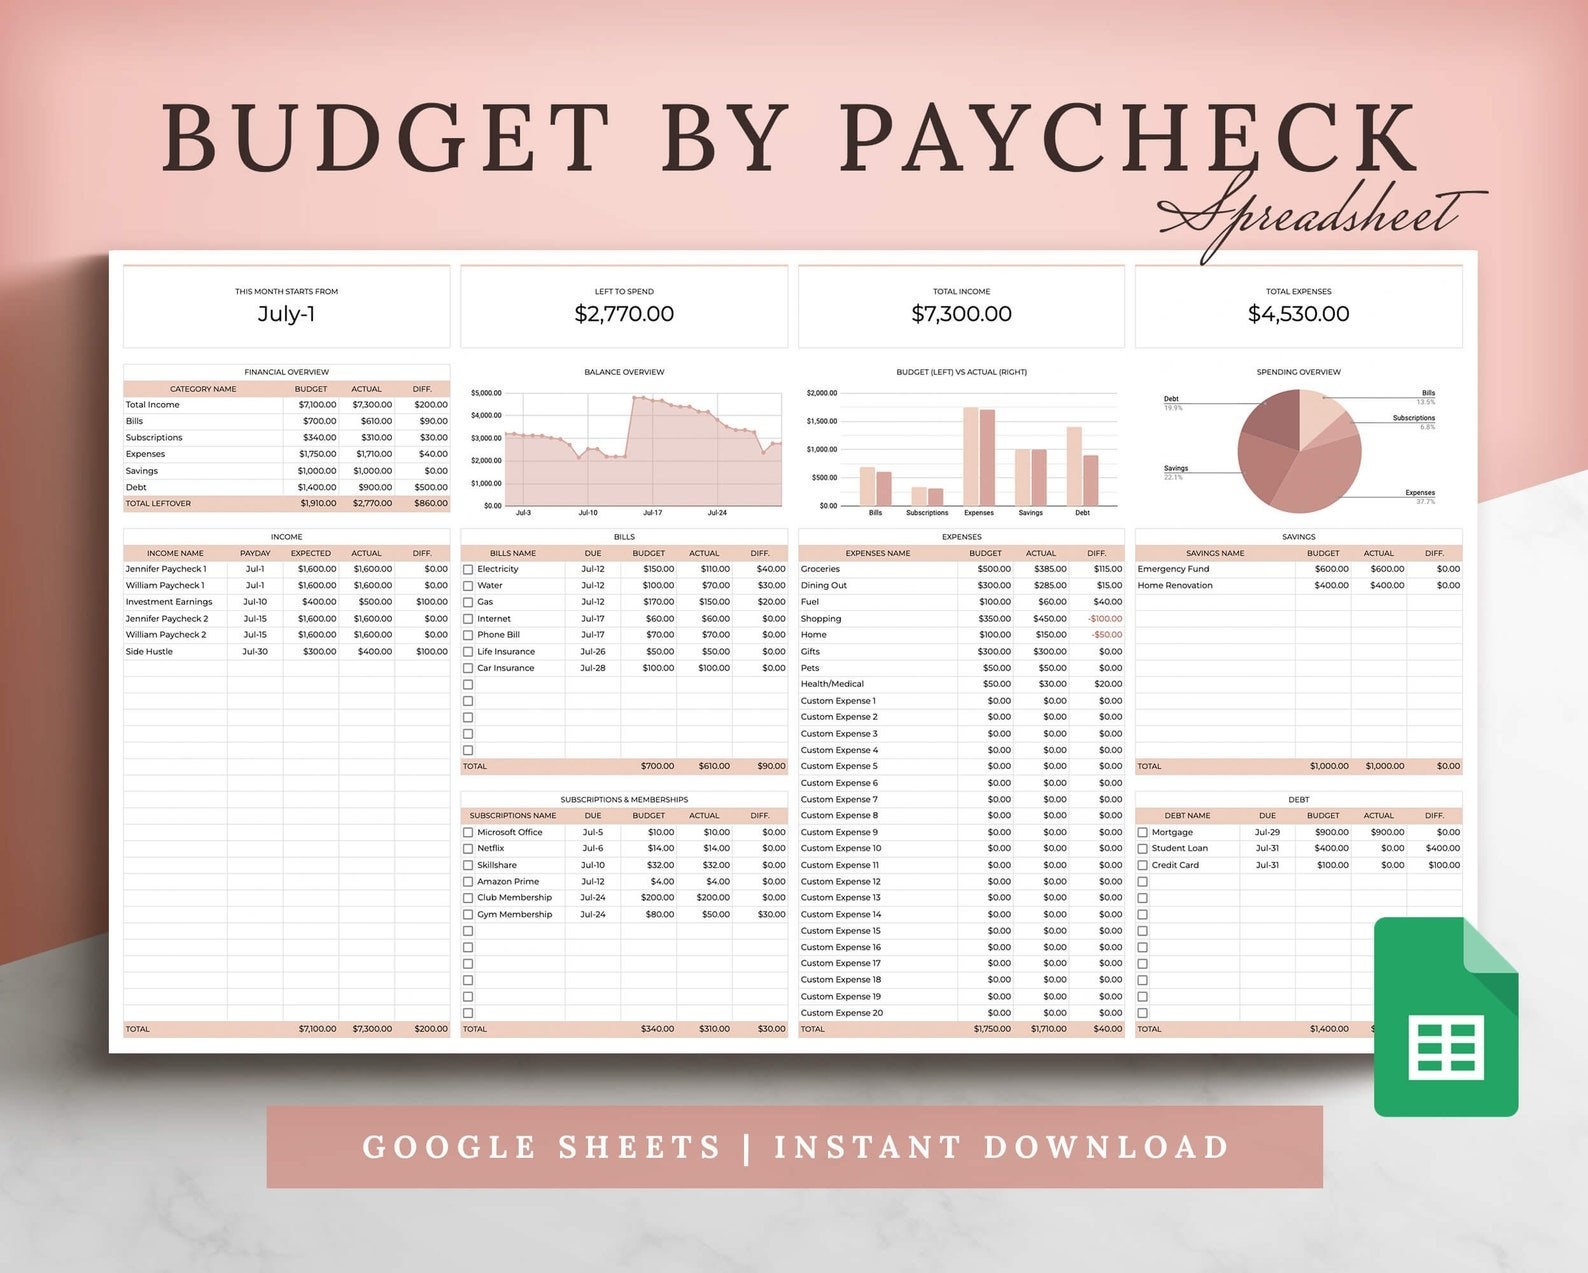 The layout of the budget spreadsheet